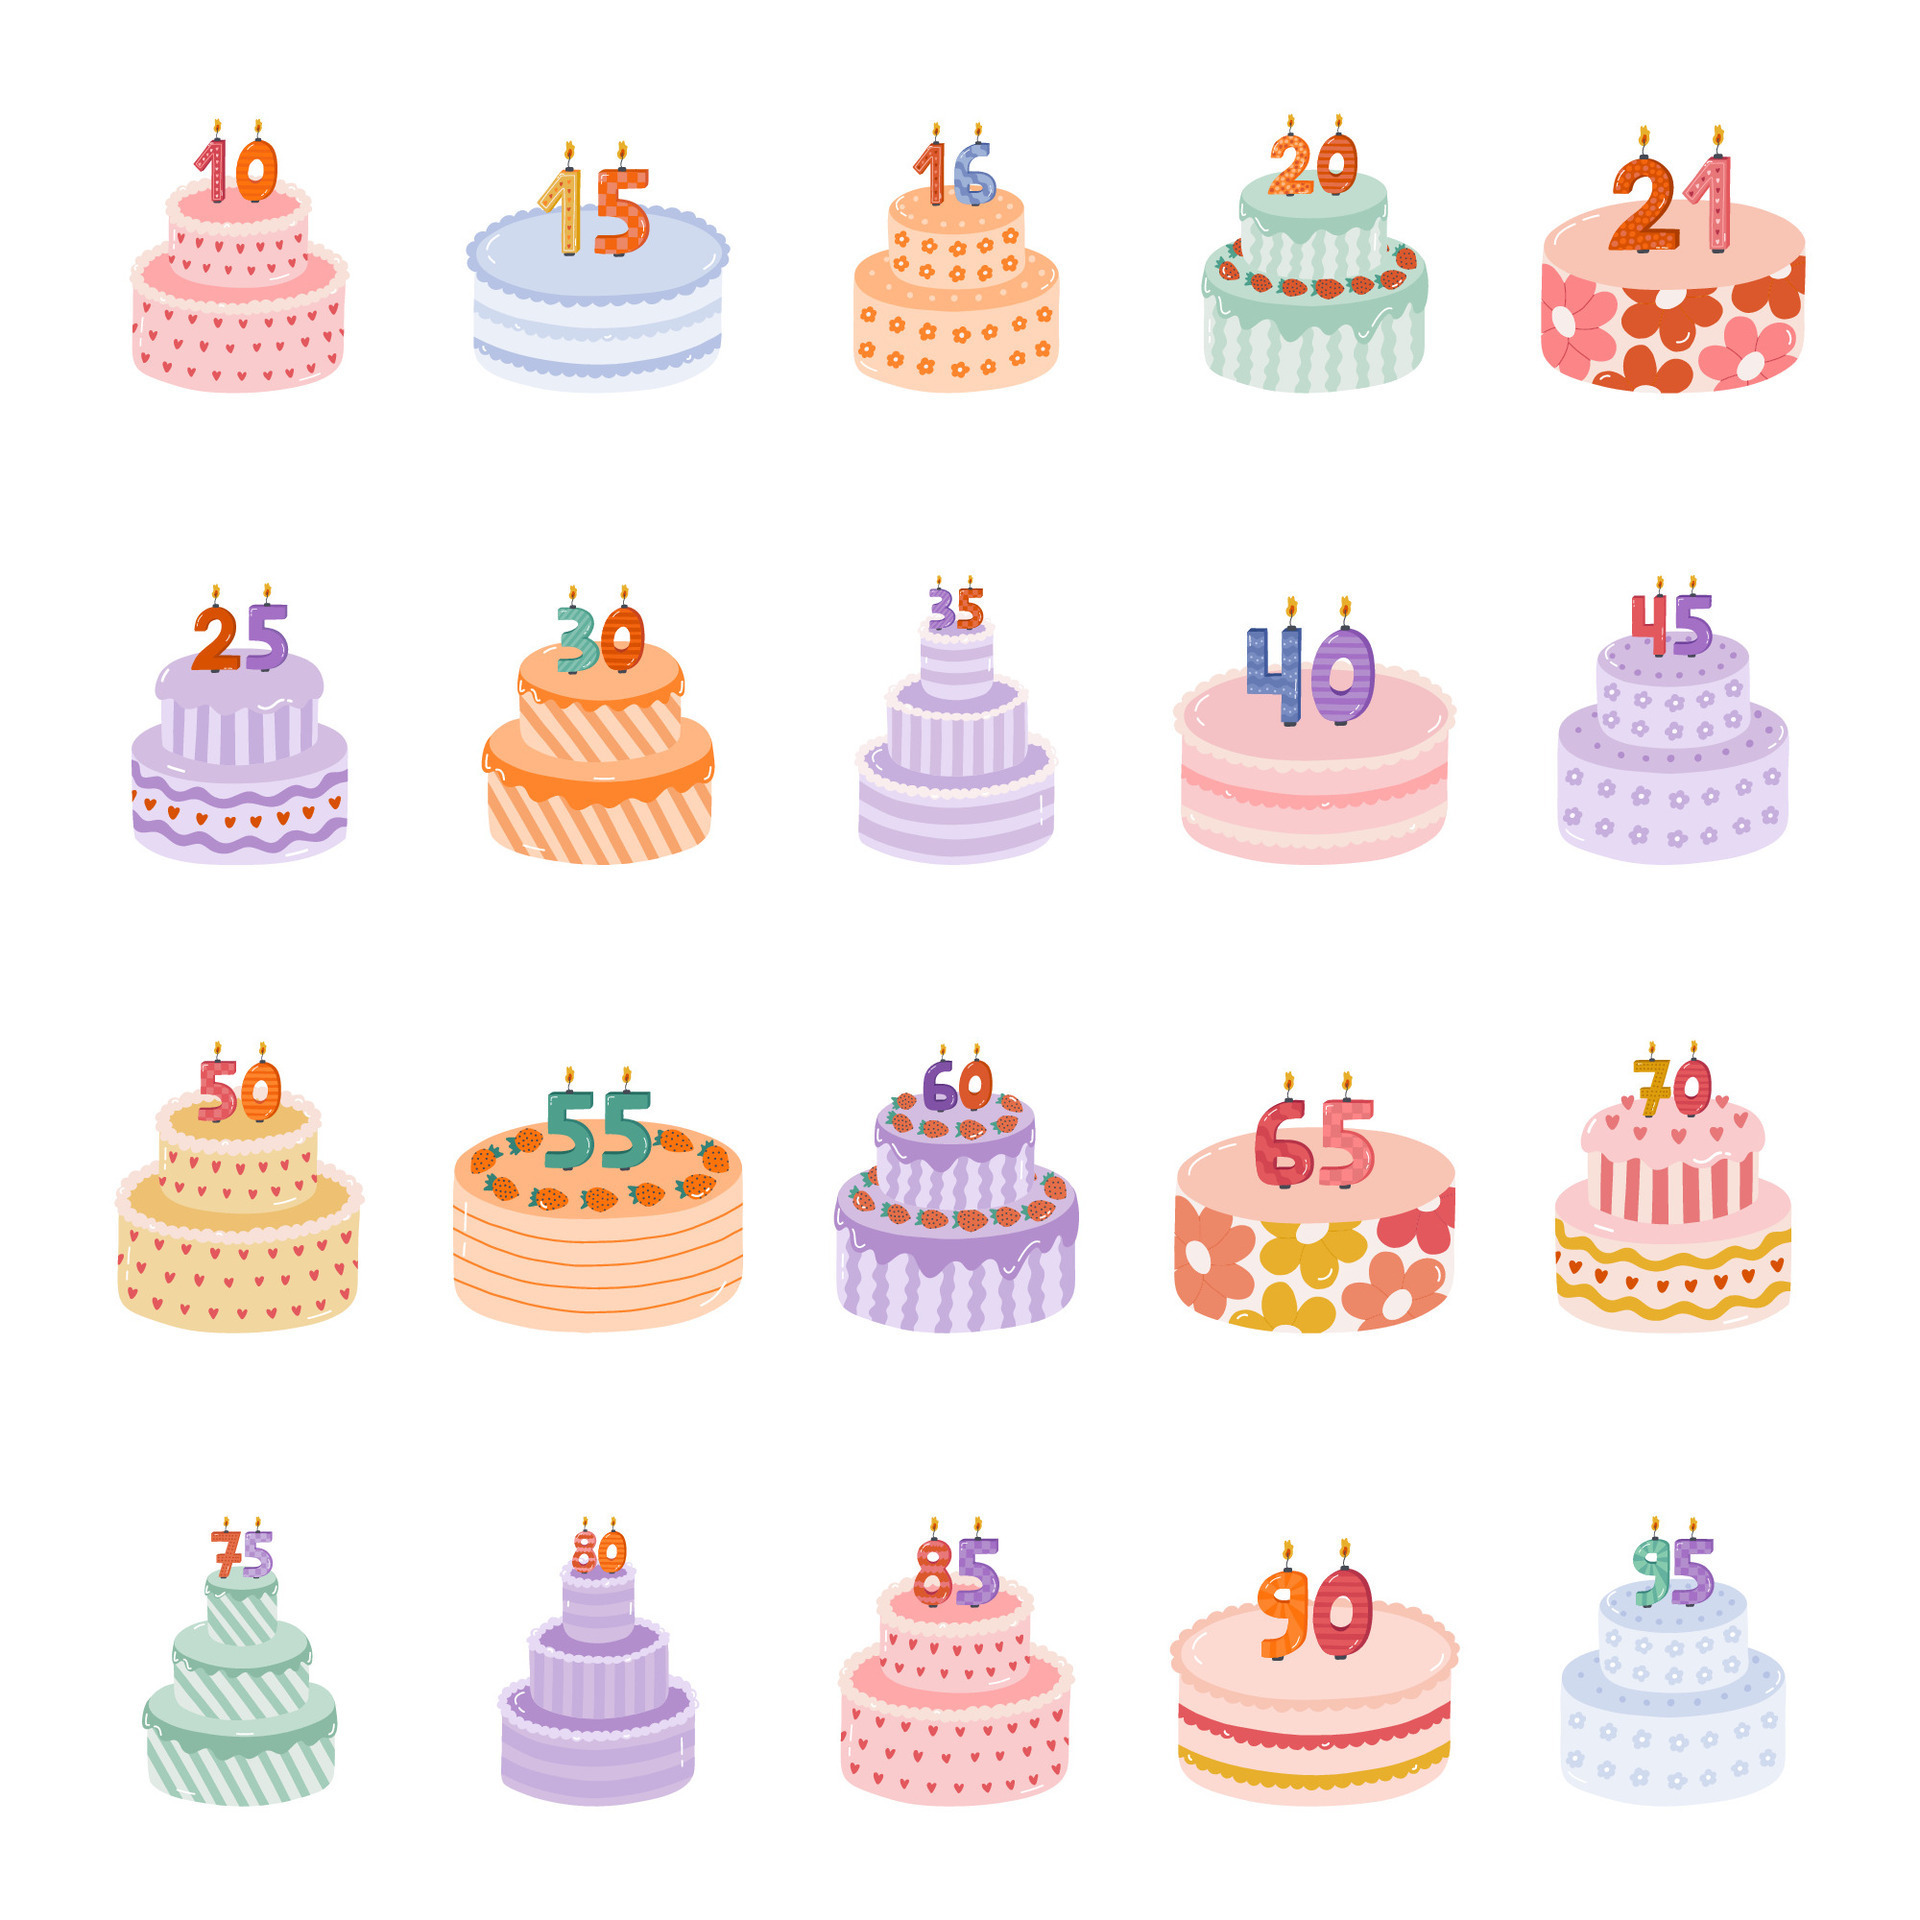 Four Candles on Birthday Cake Coloring Pages | Candy coloring pages,  Cupcake coloring pages, Coloring pages to print